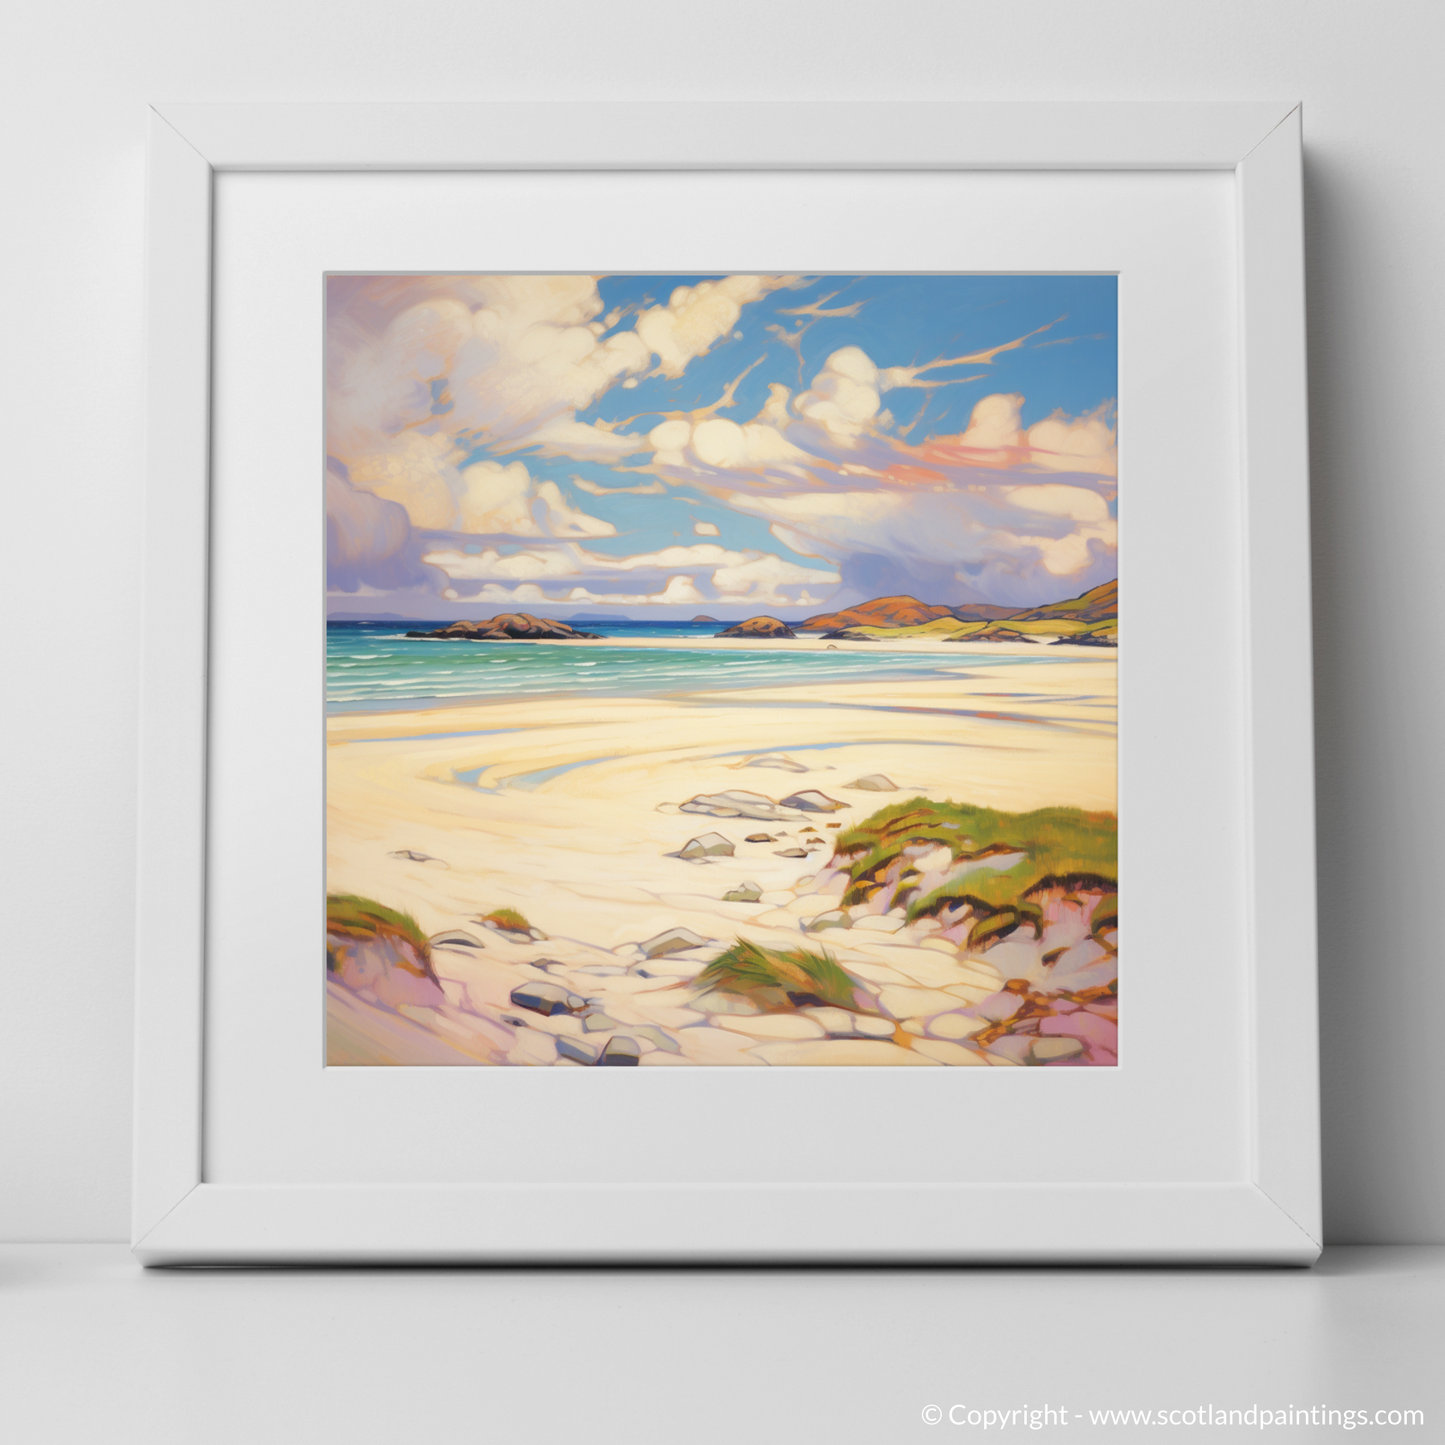 Art Print of Luskentyre Sands, Isle of Lewis in summer with a white frame